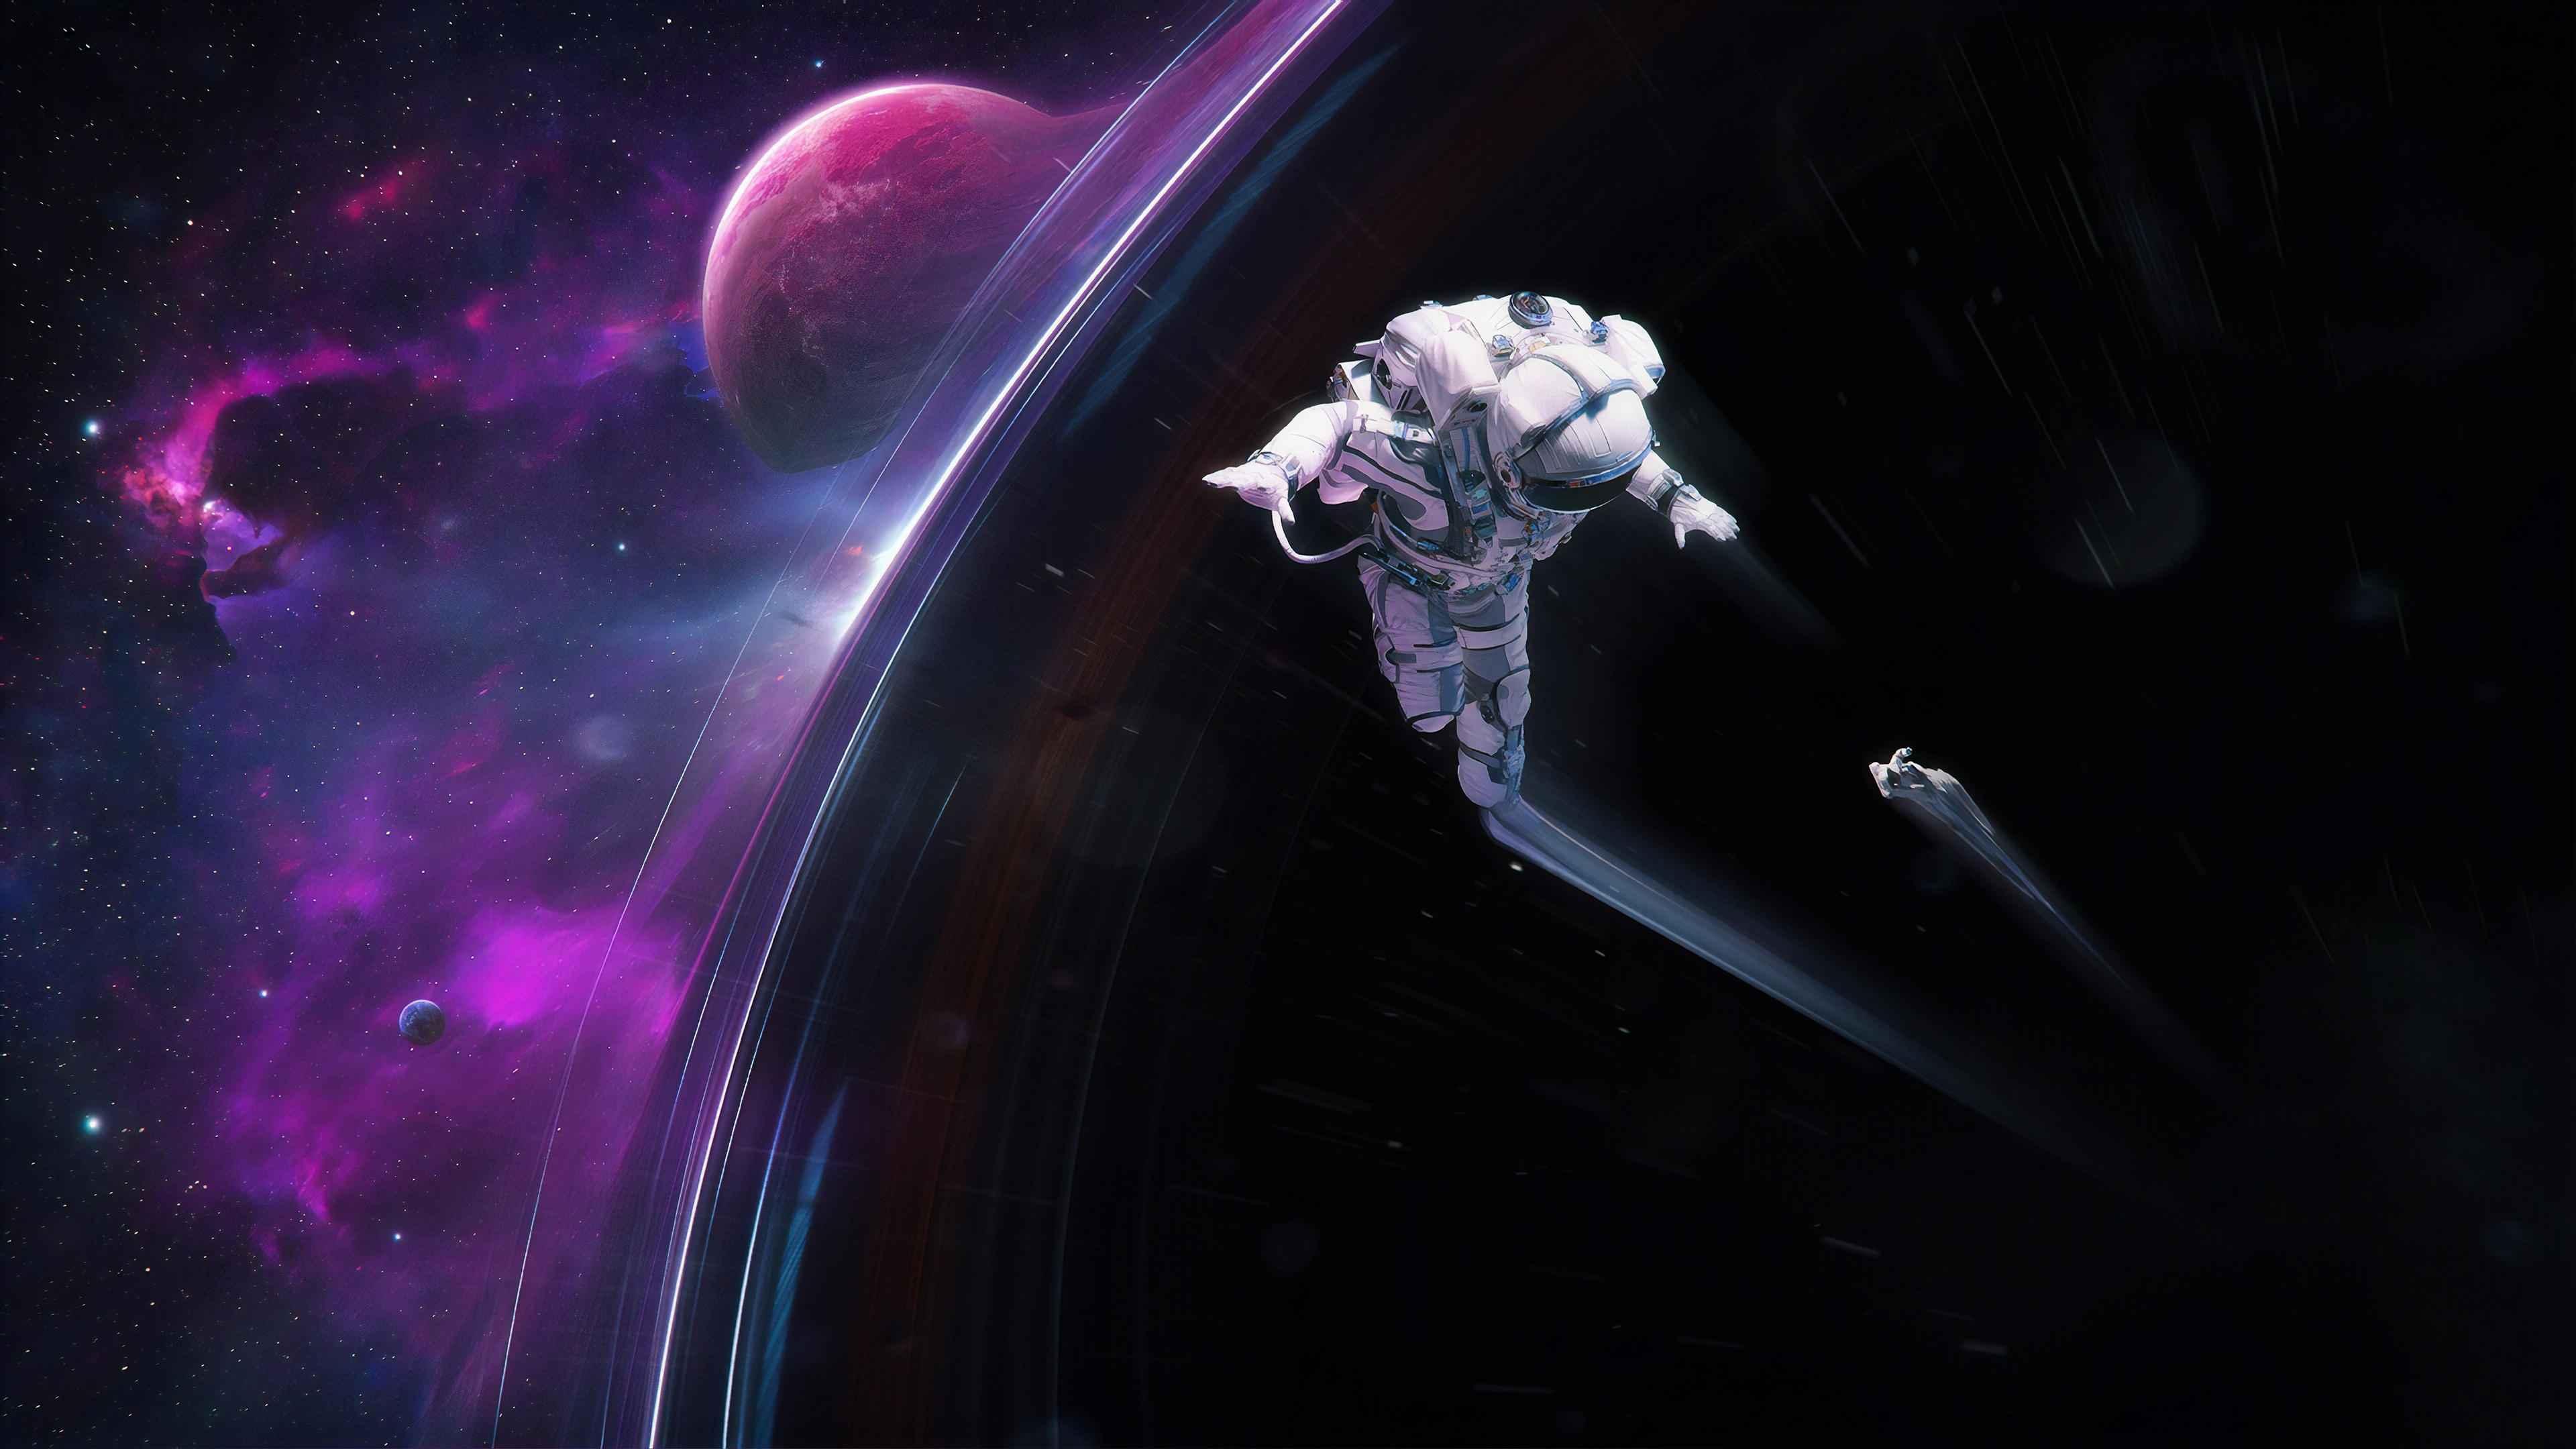  Astronaut HQ Background Images